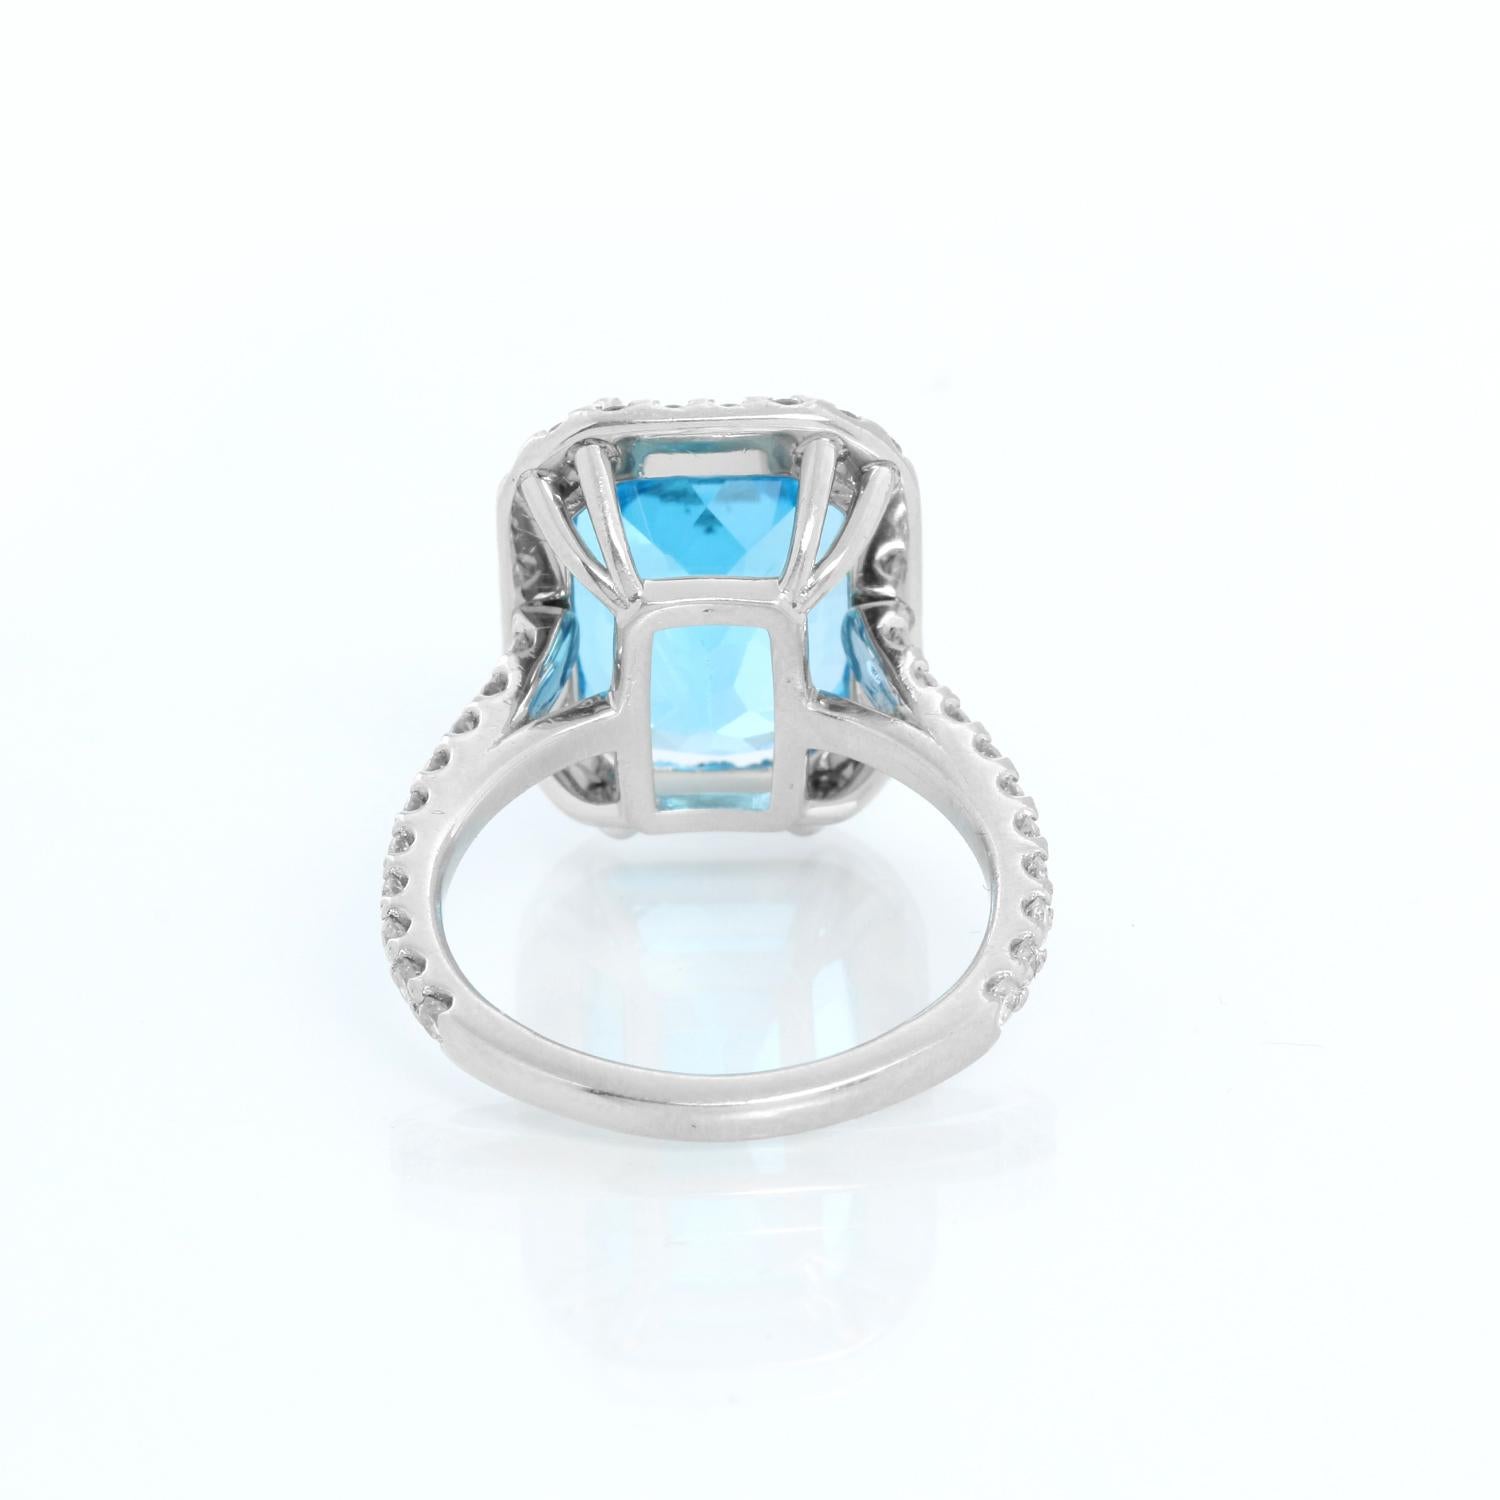 7 Carat London Topaz & Diamonds White Gold Ring In Excellent Condition For Sale In Dallas, TX